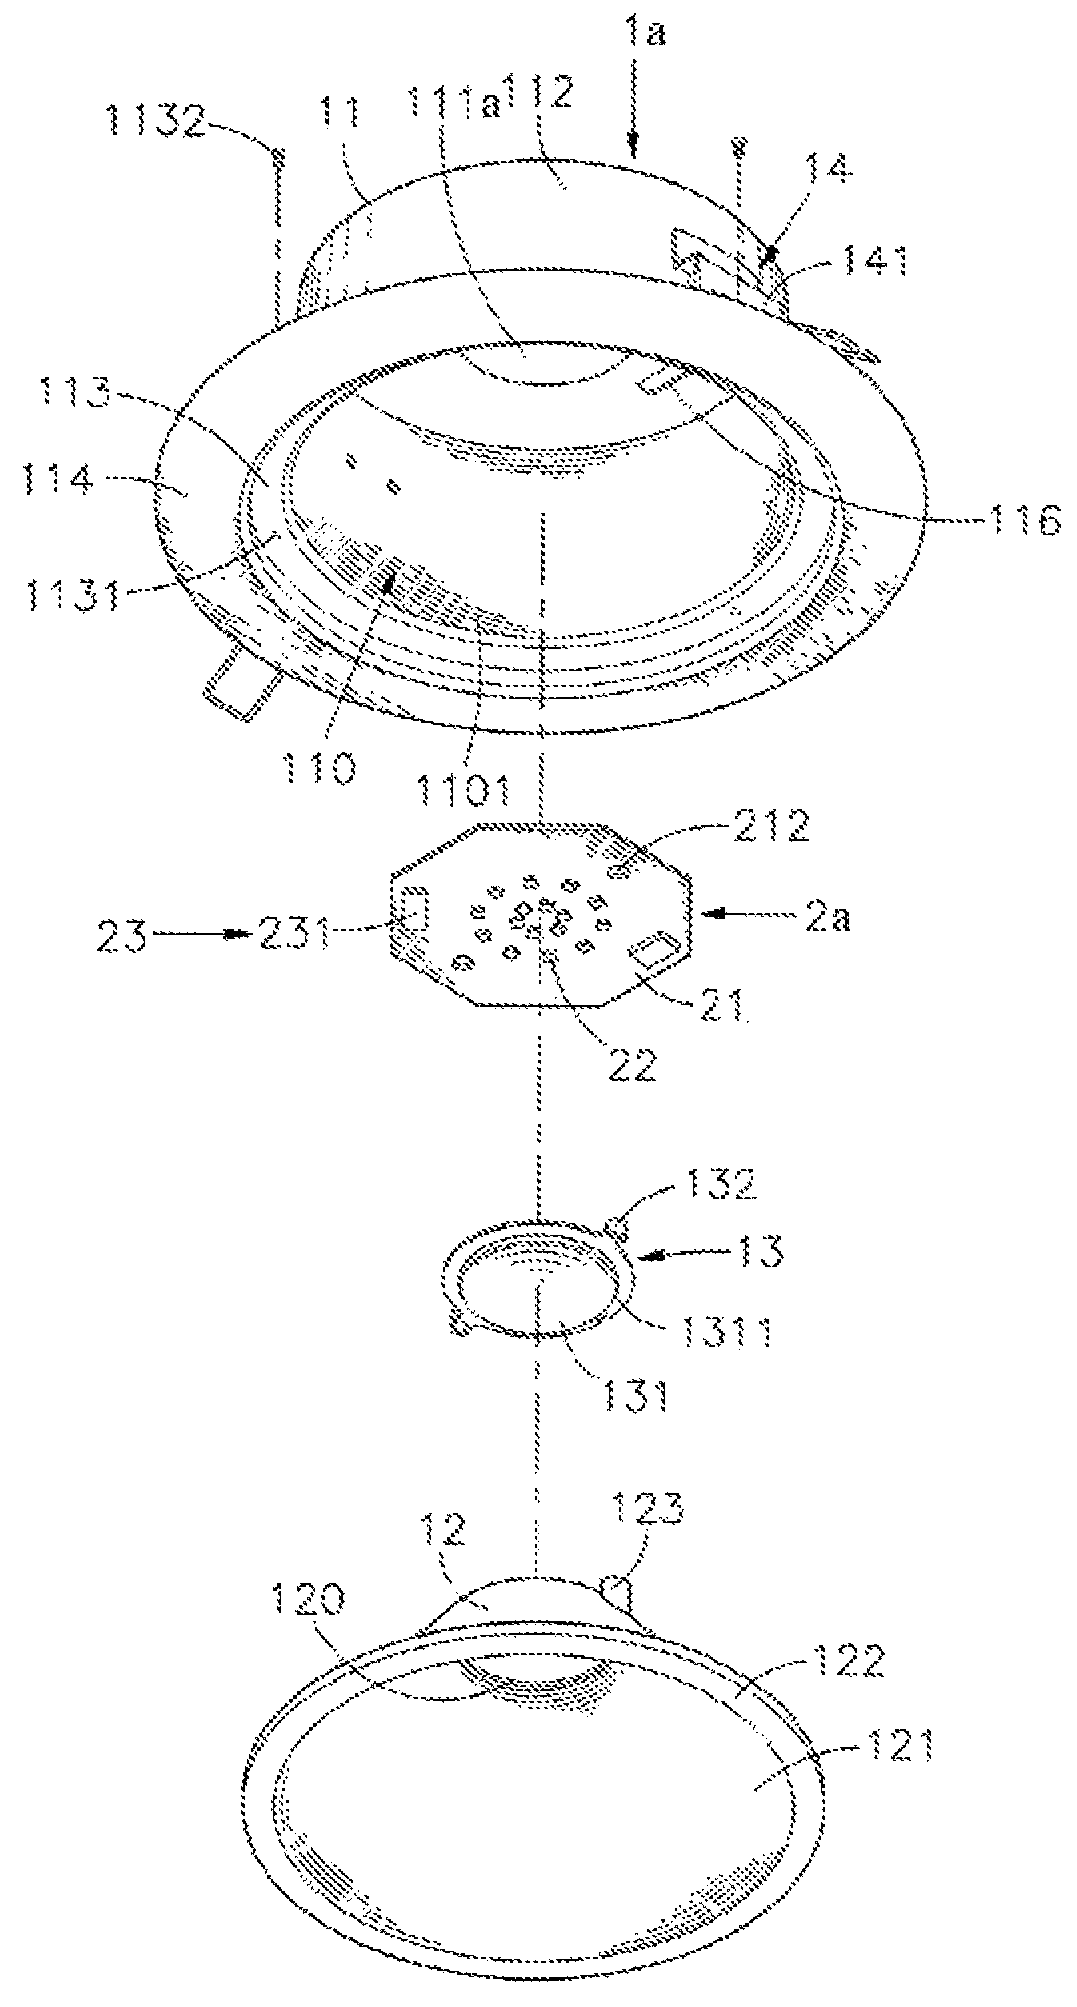 LED lighting device having a structural design that effectively increases the surface area of the circuit board for circuit layout